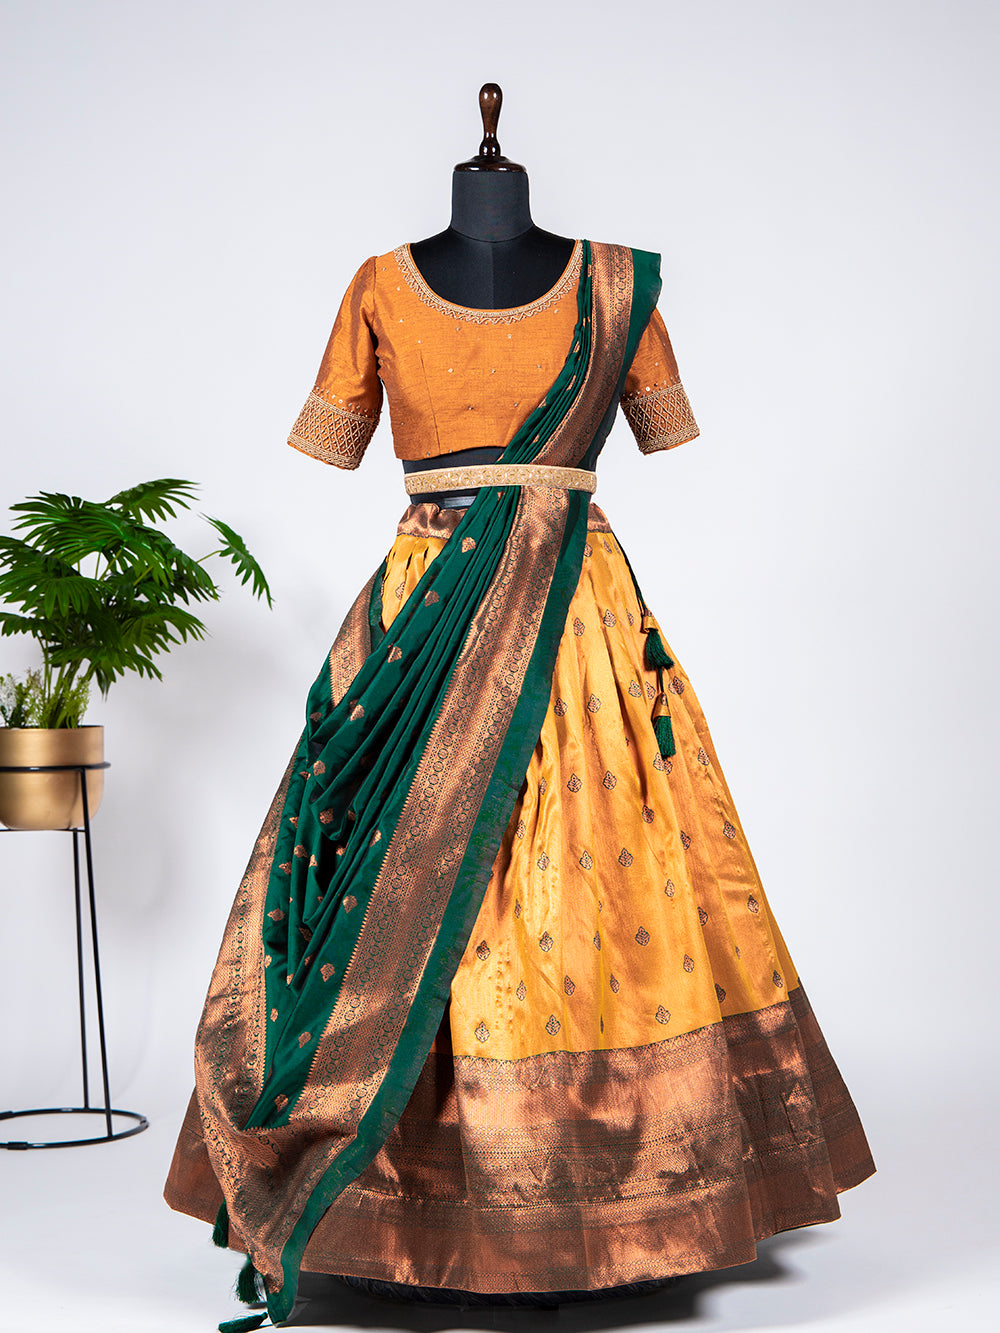 12 Modern Wedding Reception Dresses For South Indian Bride-To-Be - To Near  Me